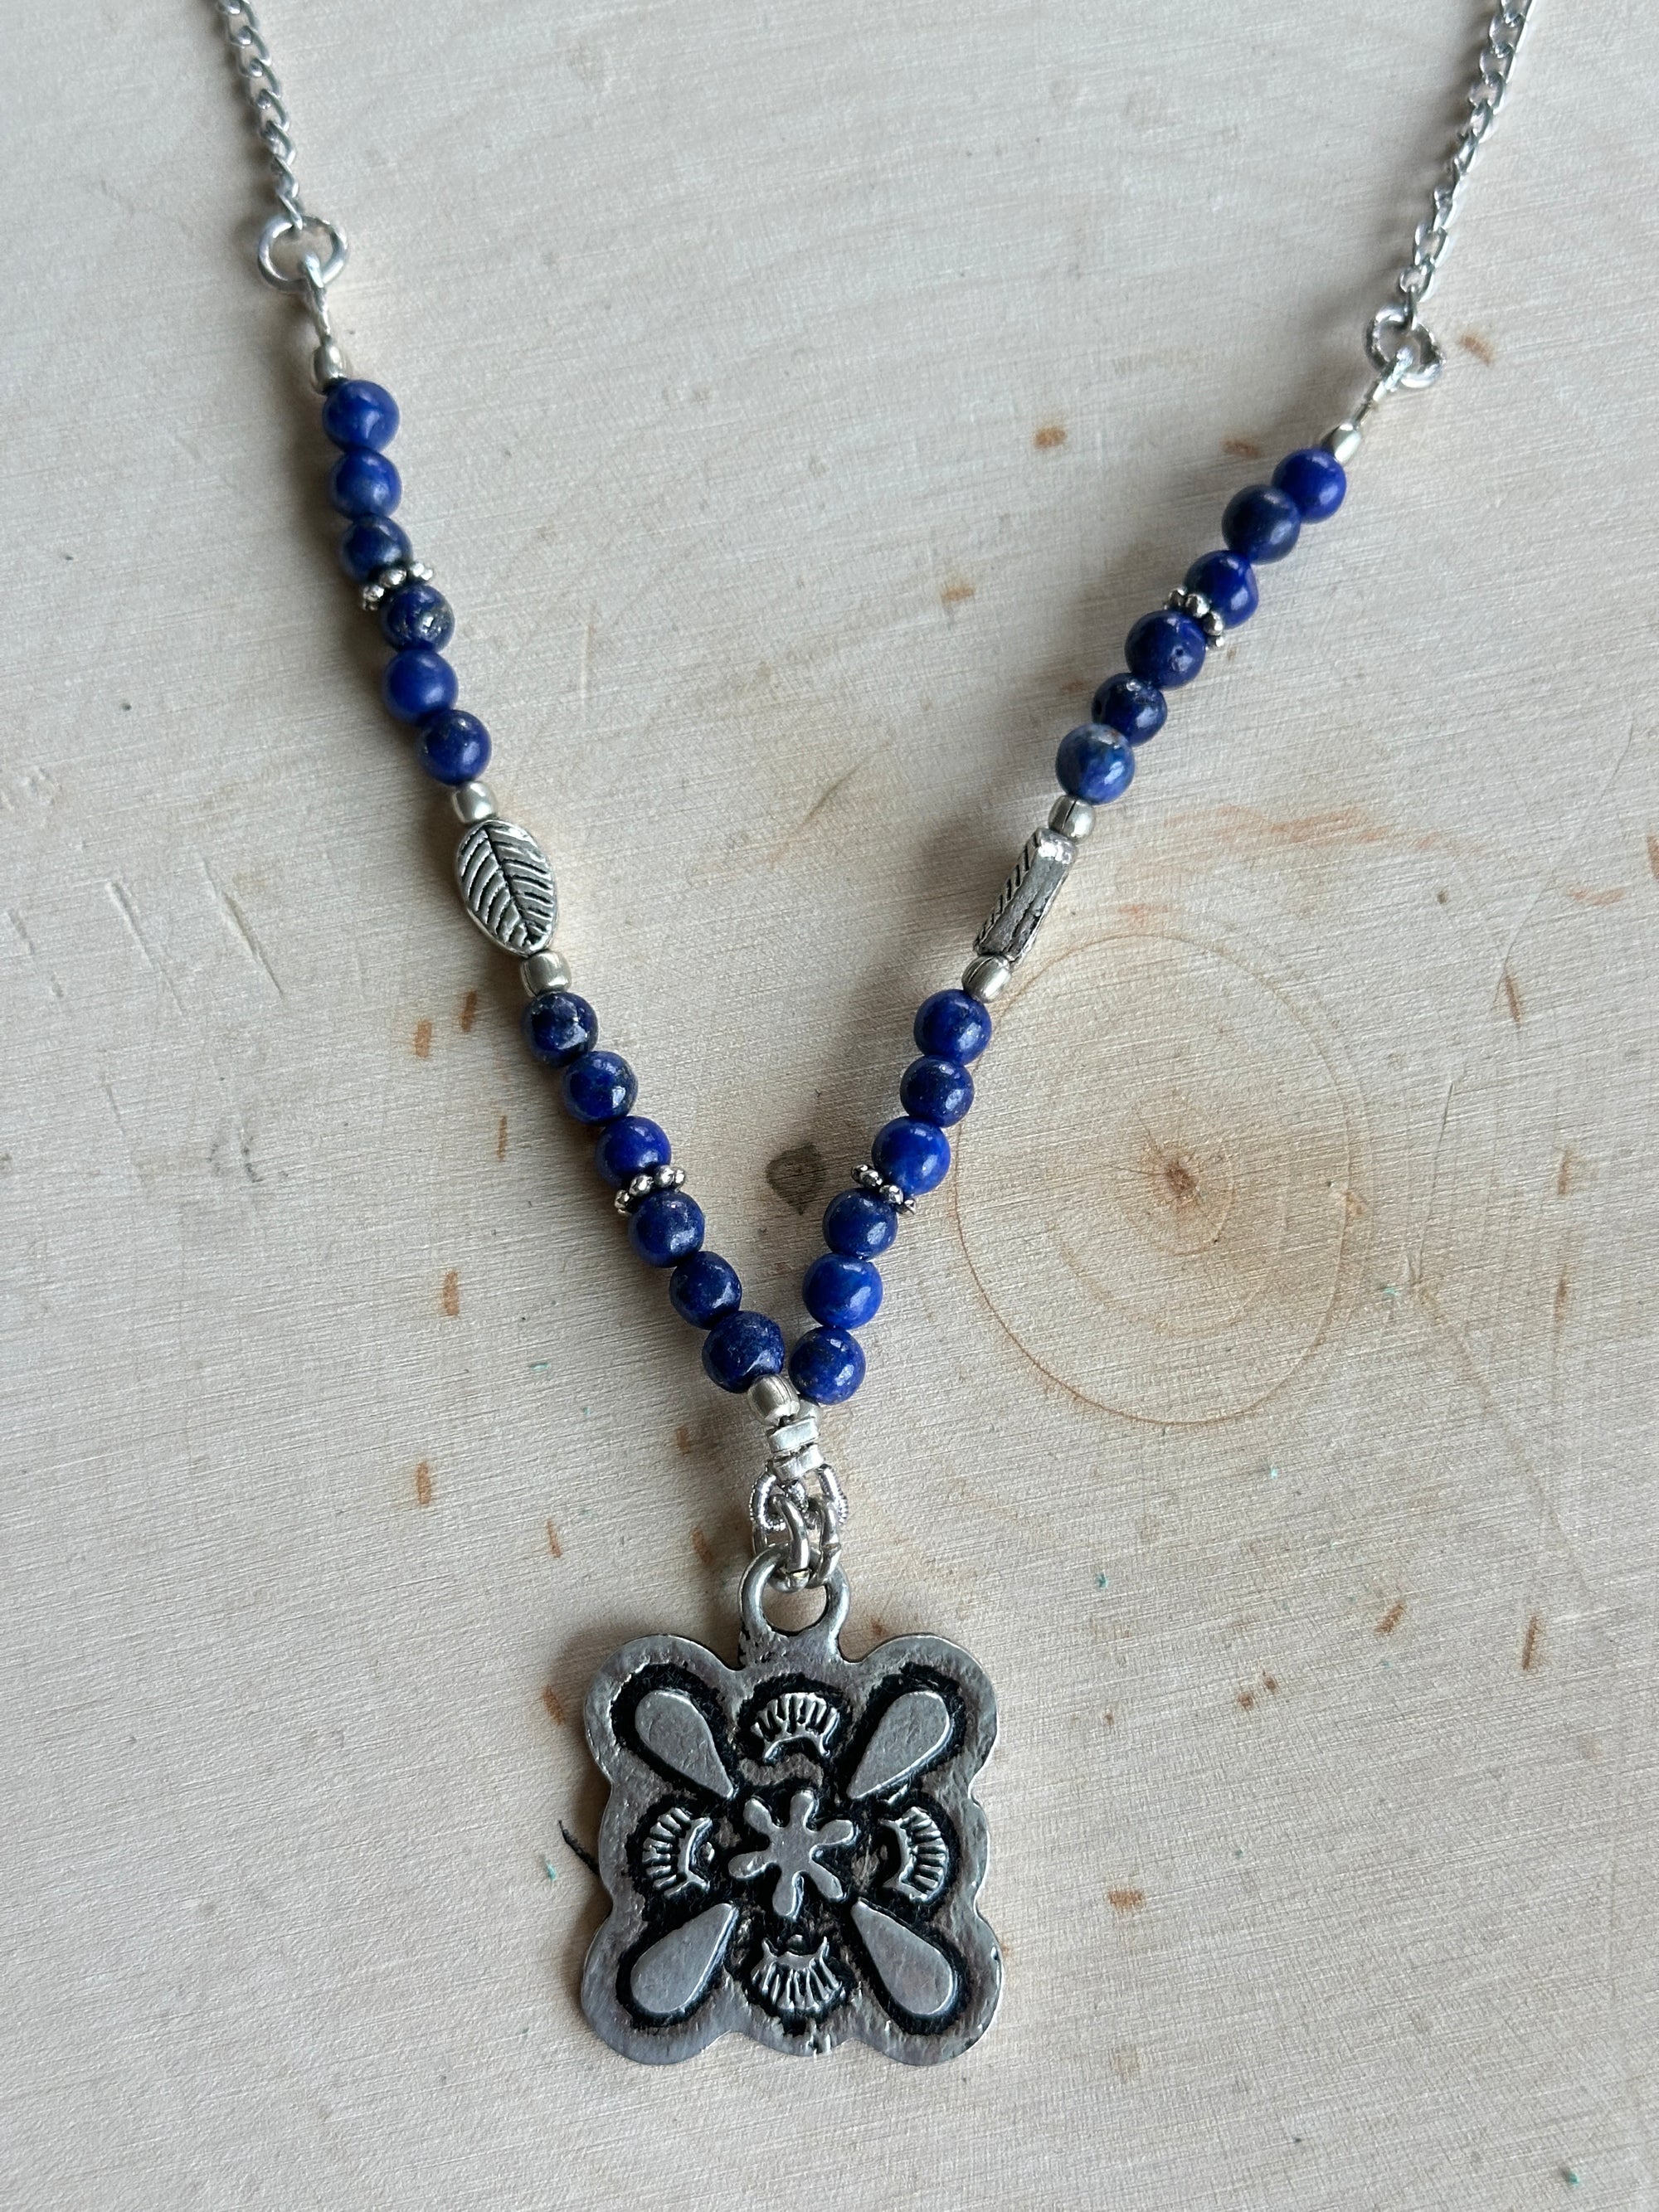 Blue Beads On Silver Necklace